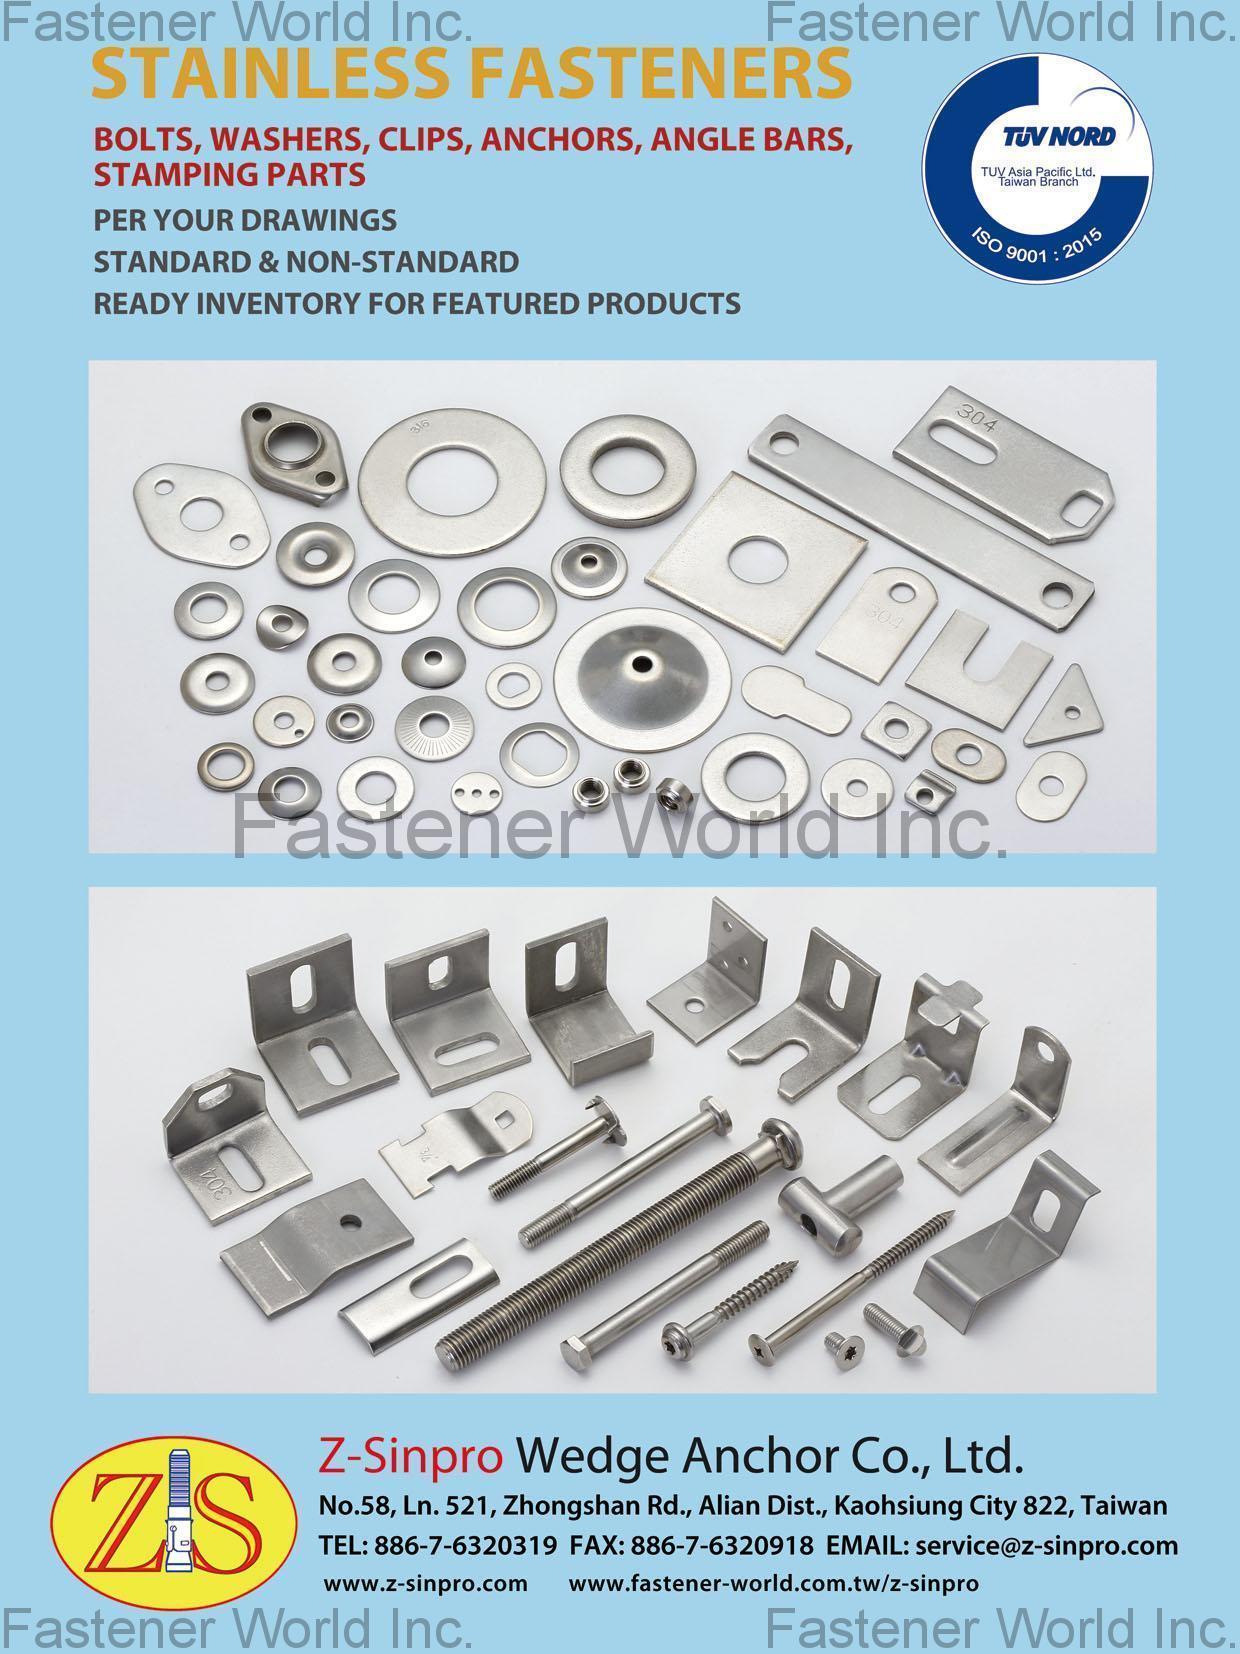 Z-SINPRO WEDGE ANCHOR CO., LTD. , Stainless Fasteners, Bolts, Washers, Clips, Anchors, Angle Bars, Stamping Parts , Stainless Steel Bolts